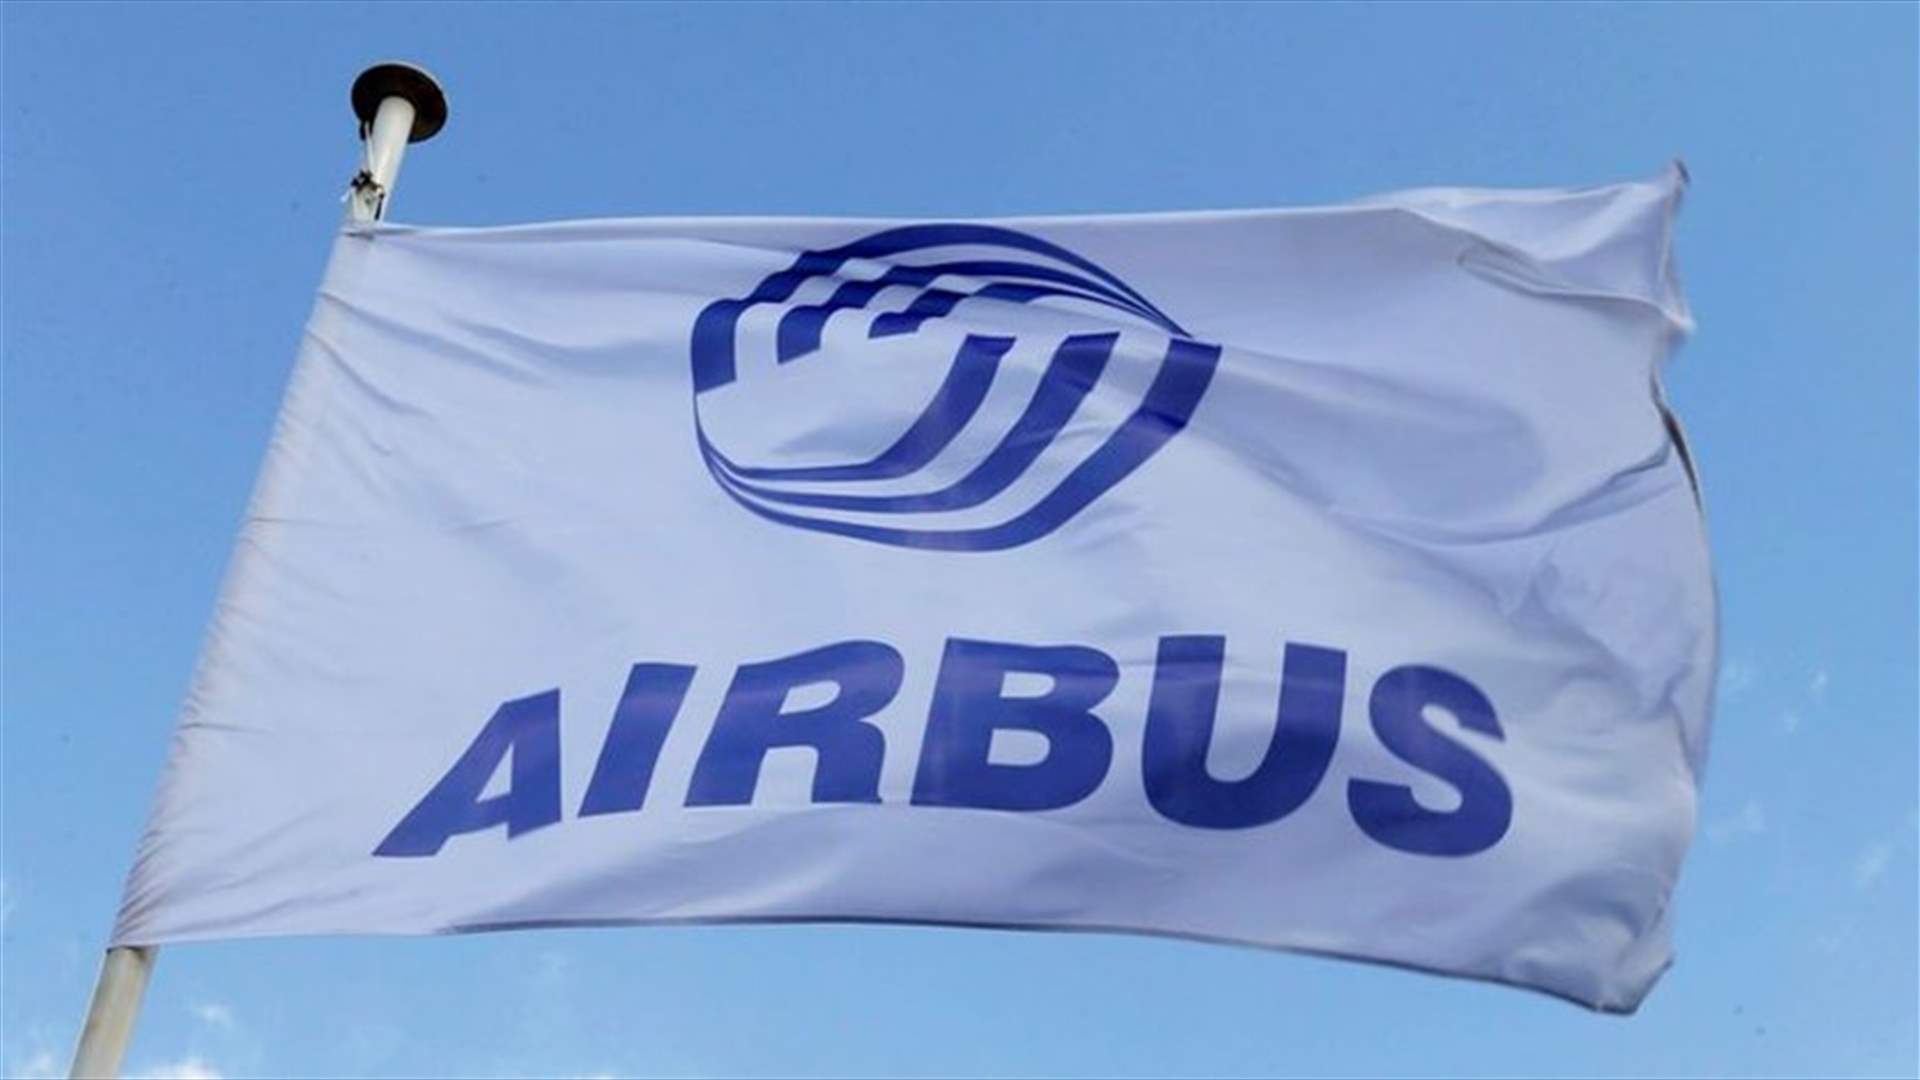 Airbus to boost some pay as Macron urges French firms to tackle crisis